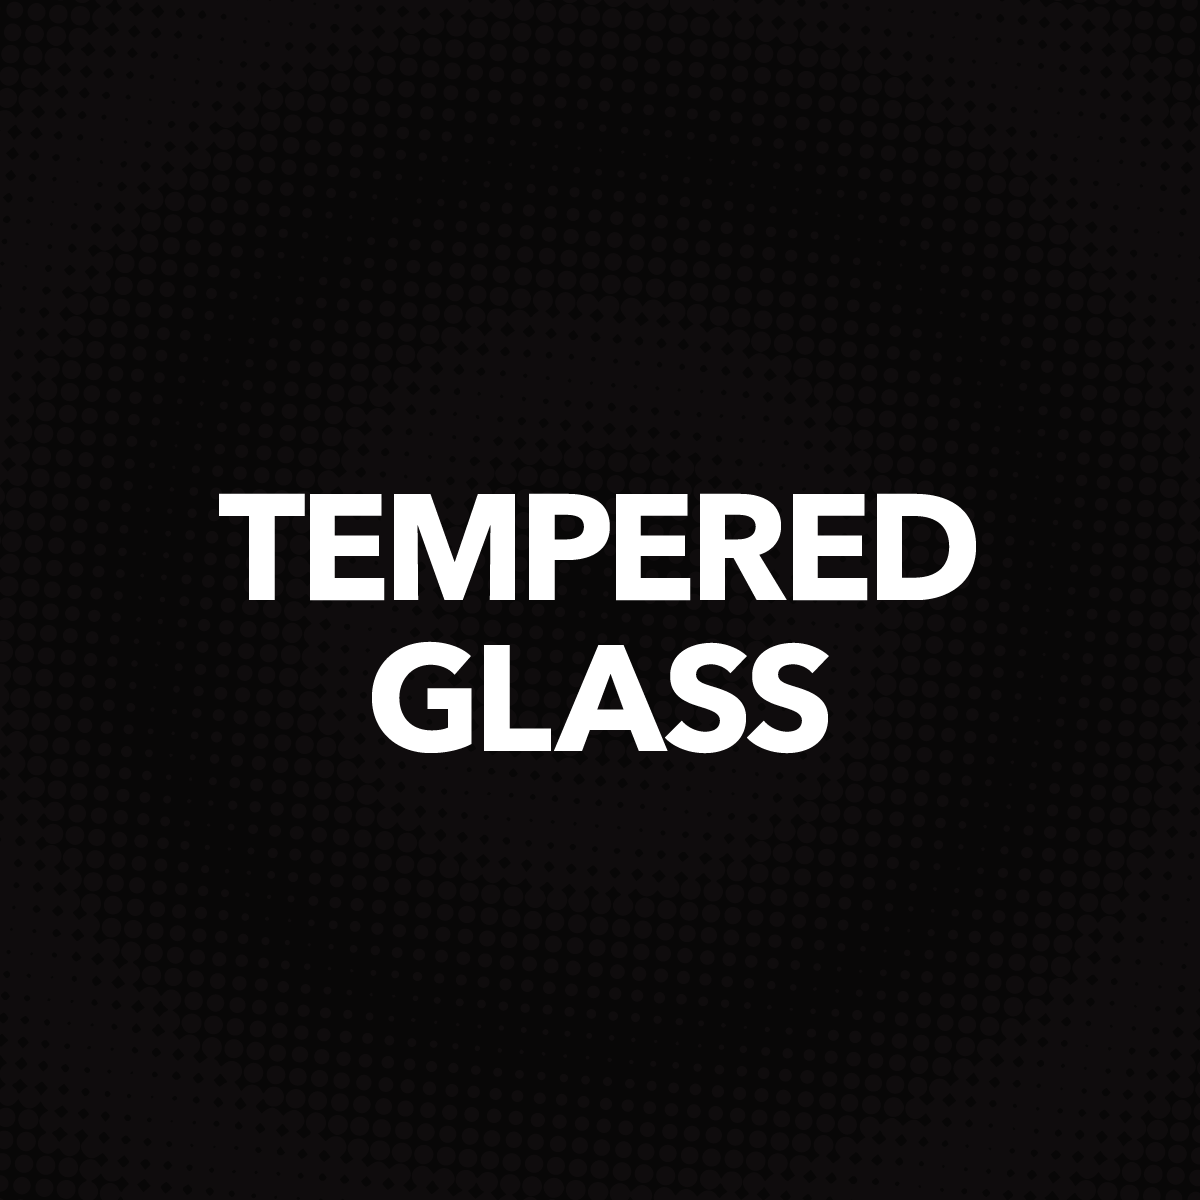 Tempered Glass Text